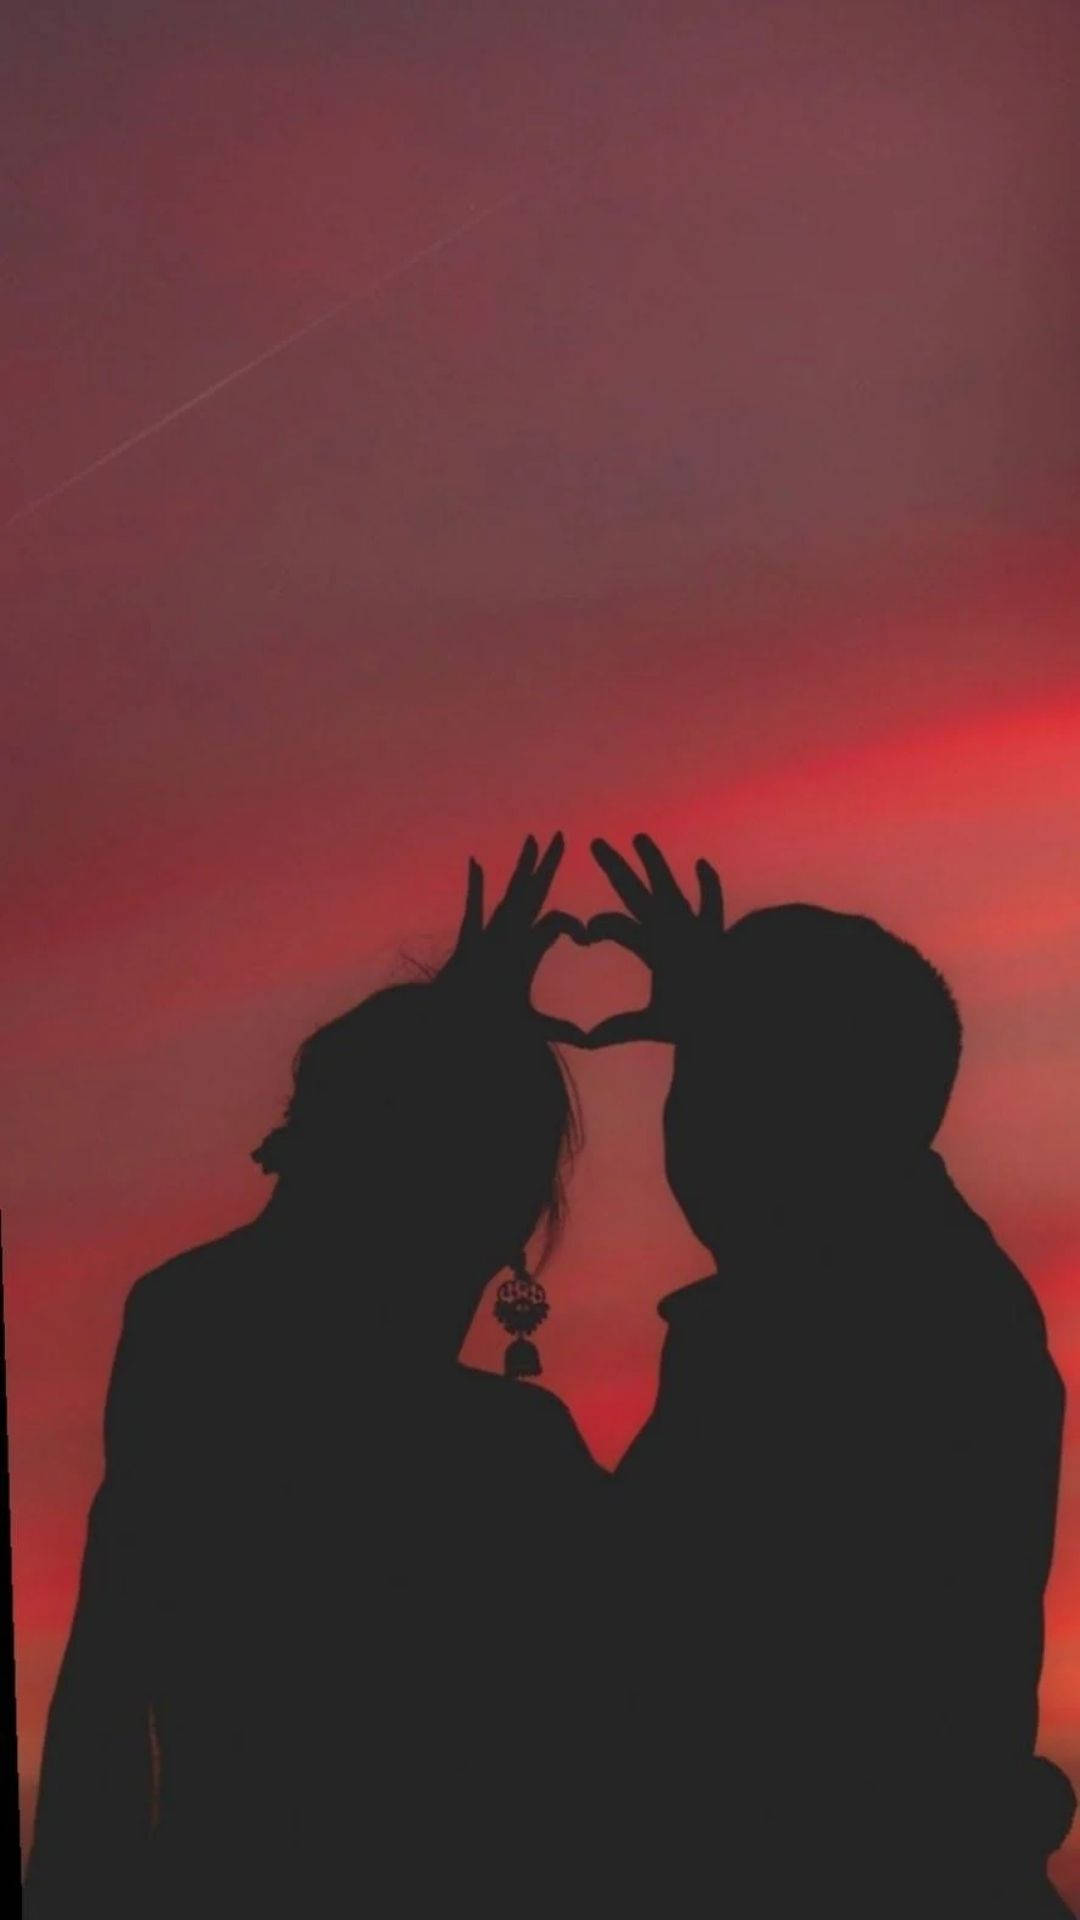 Aesthetic Couple With Red Sky